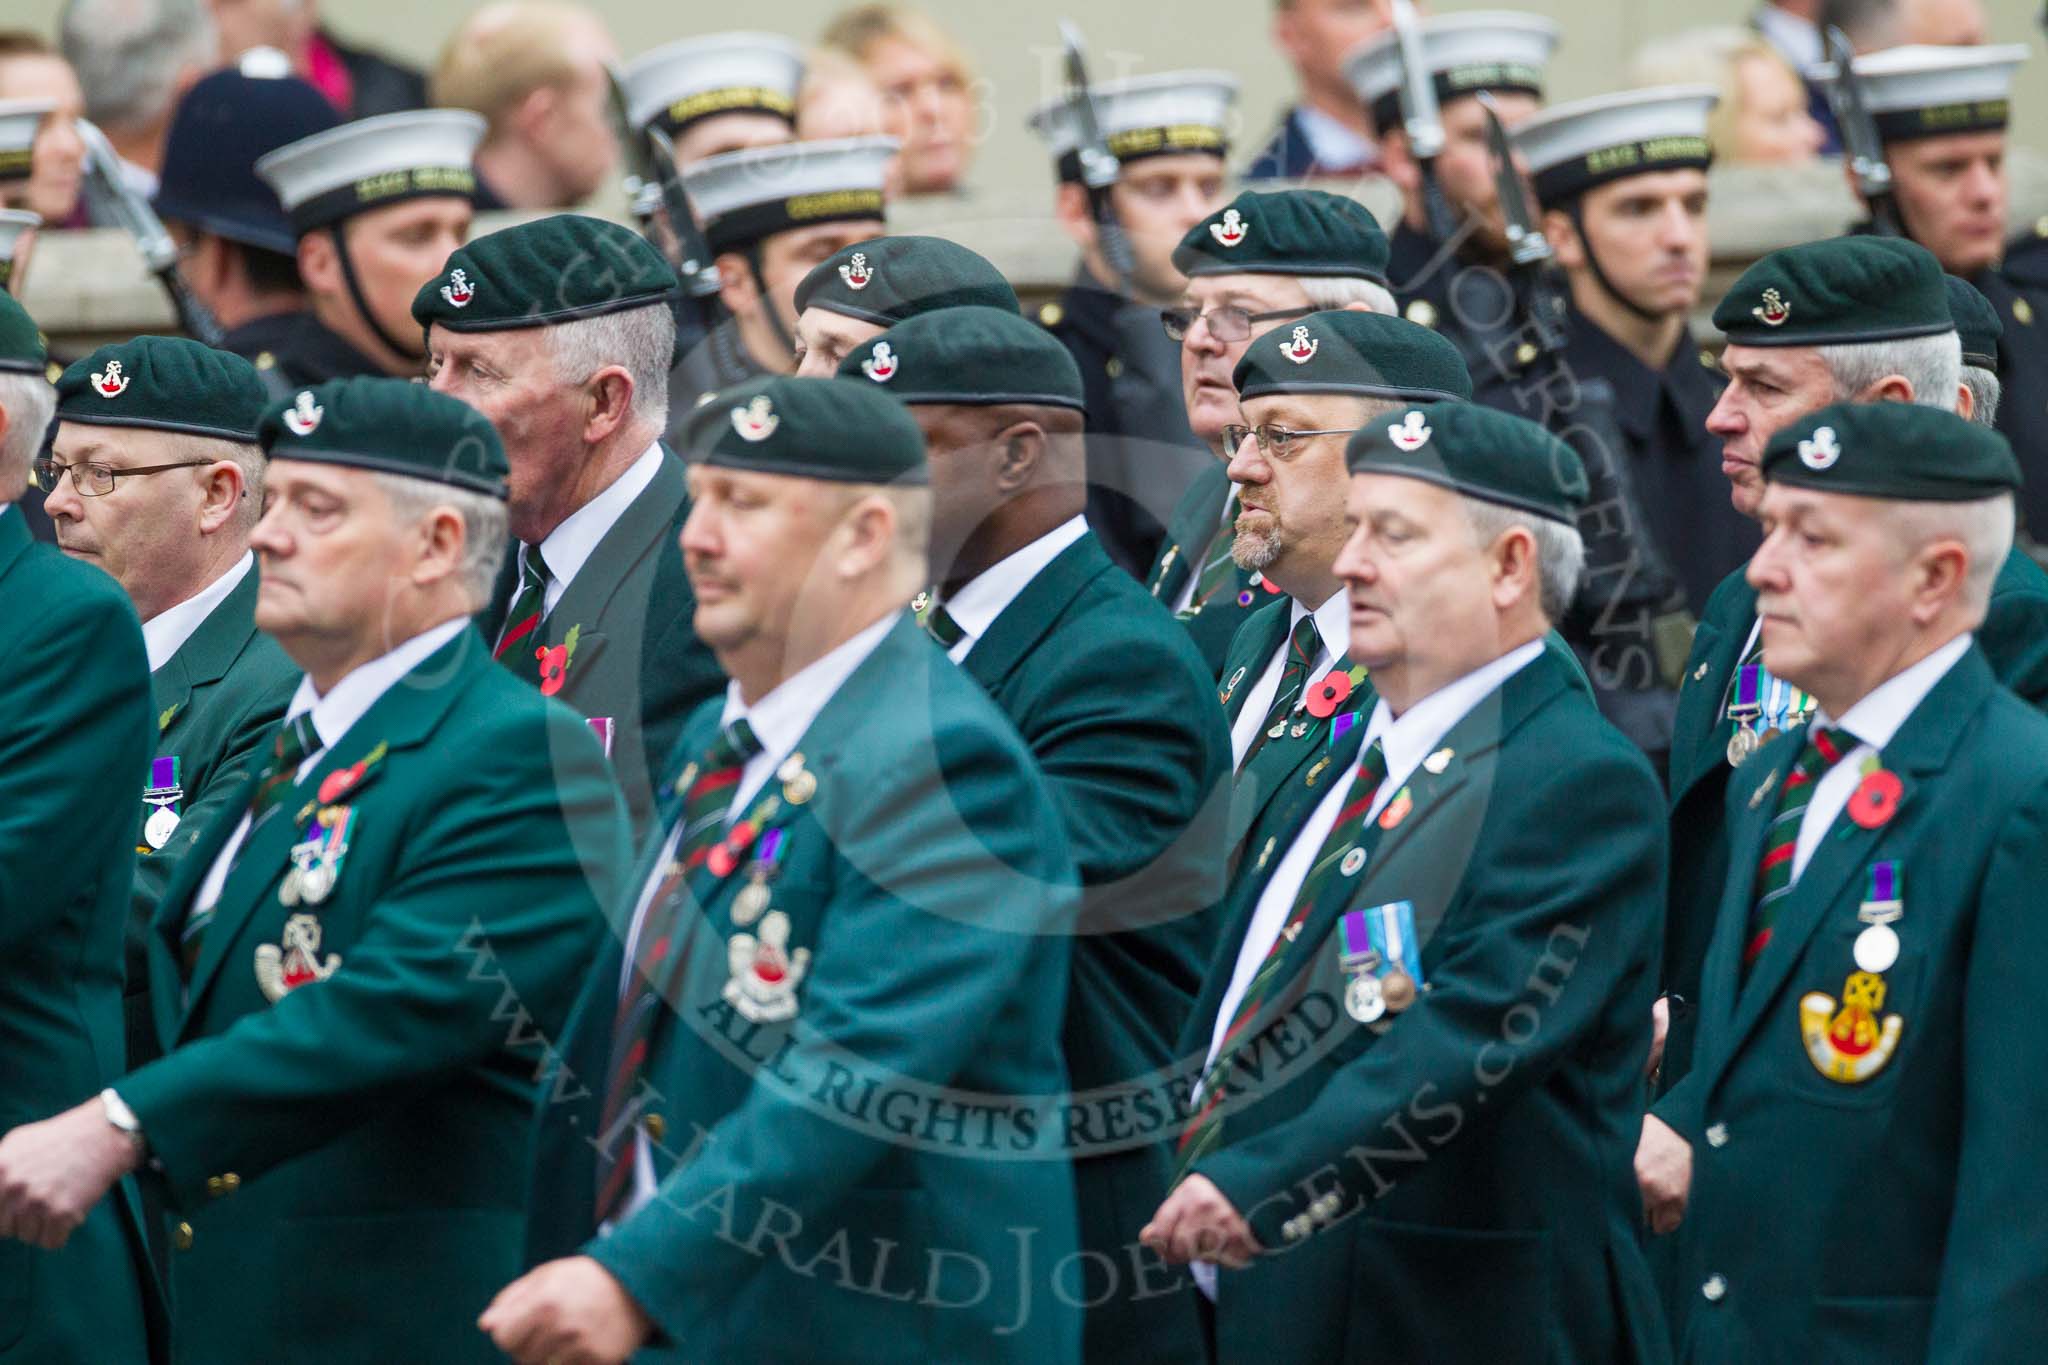 Remembrance Sunday at the Cenotaph 2015: Group A1, 1LI Association.
Cenotaph, Whitehall, London SW1,
London,
Greater London,
United Kingdom,
on 08 November 2015 at 12:07, image #1147